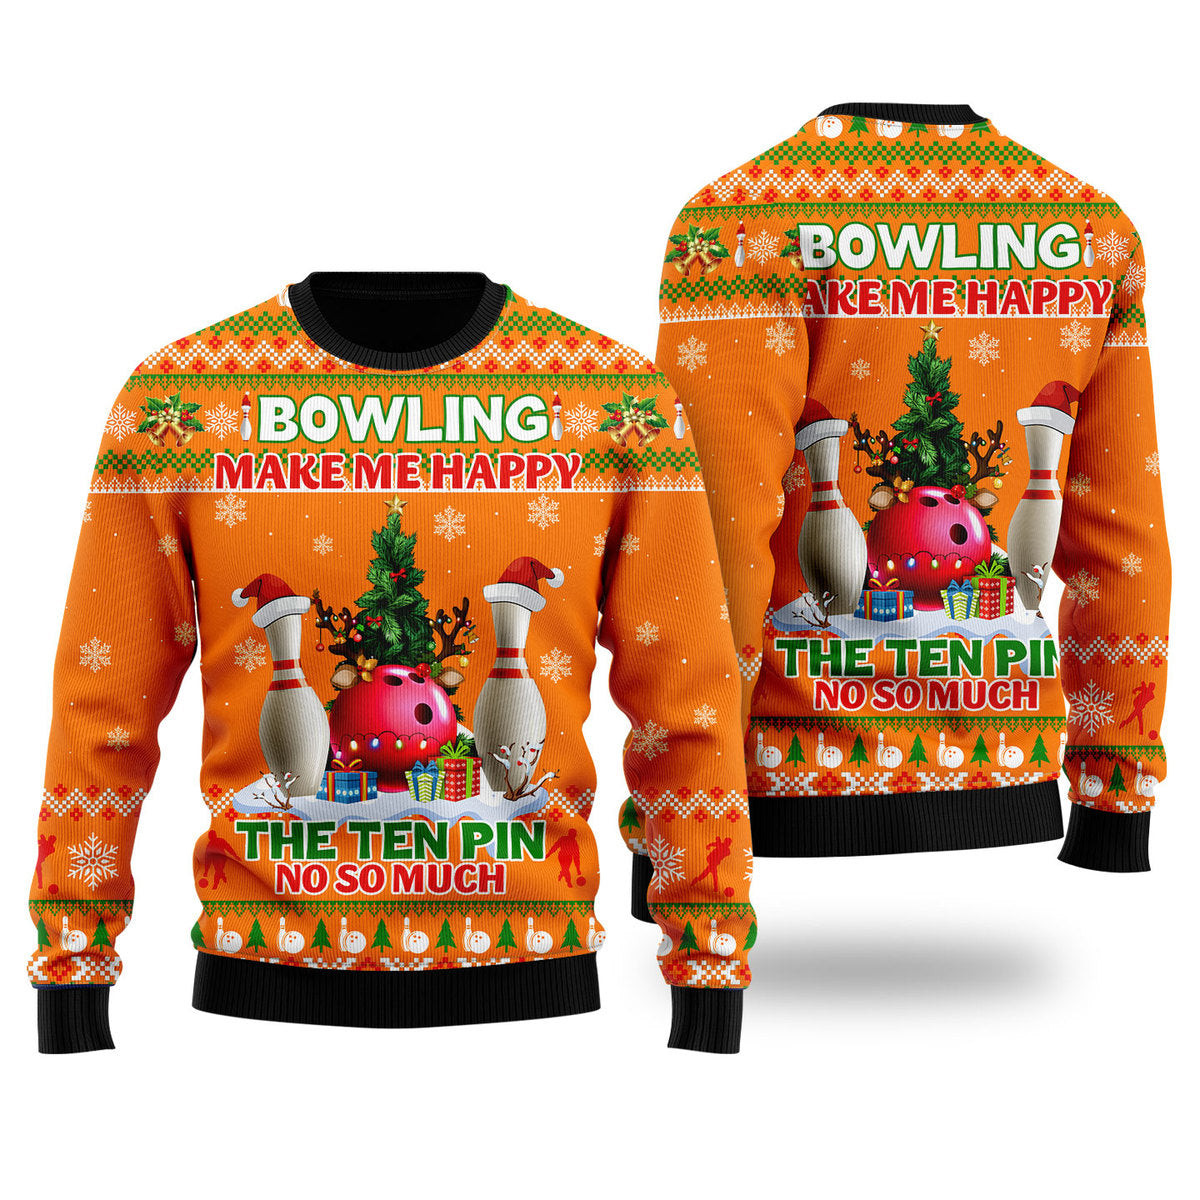 Bowling Make Me Happy The Ten Pin No So Much Ugly Christmas Sweater Ugly Sweater For Men Women